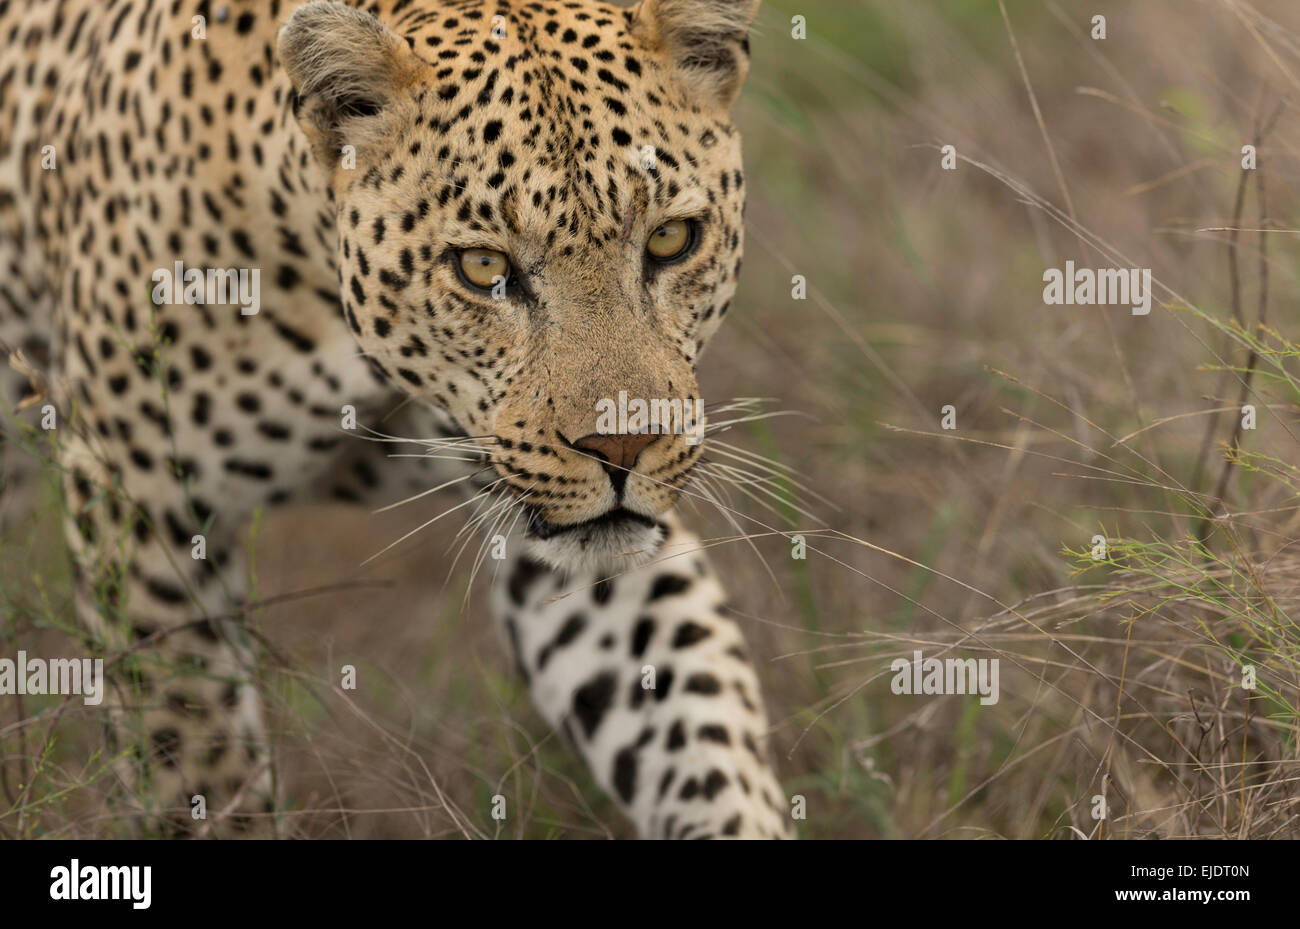 Leopard walking up close in the Kruger national park South Africa Stock Photo